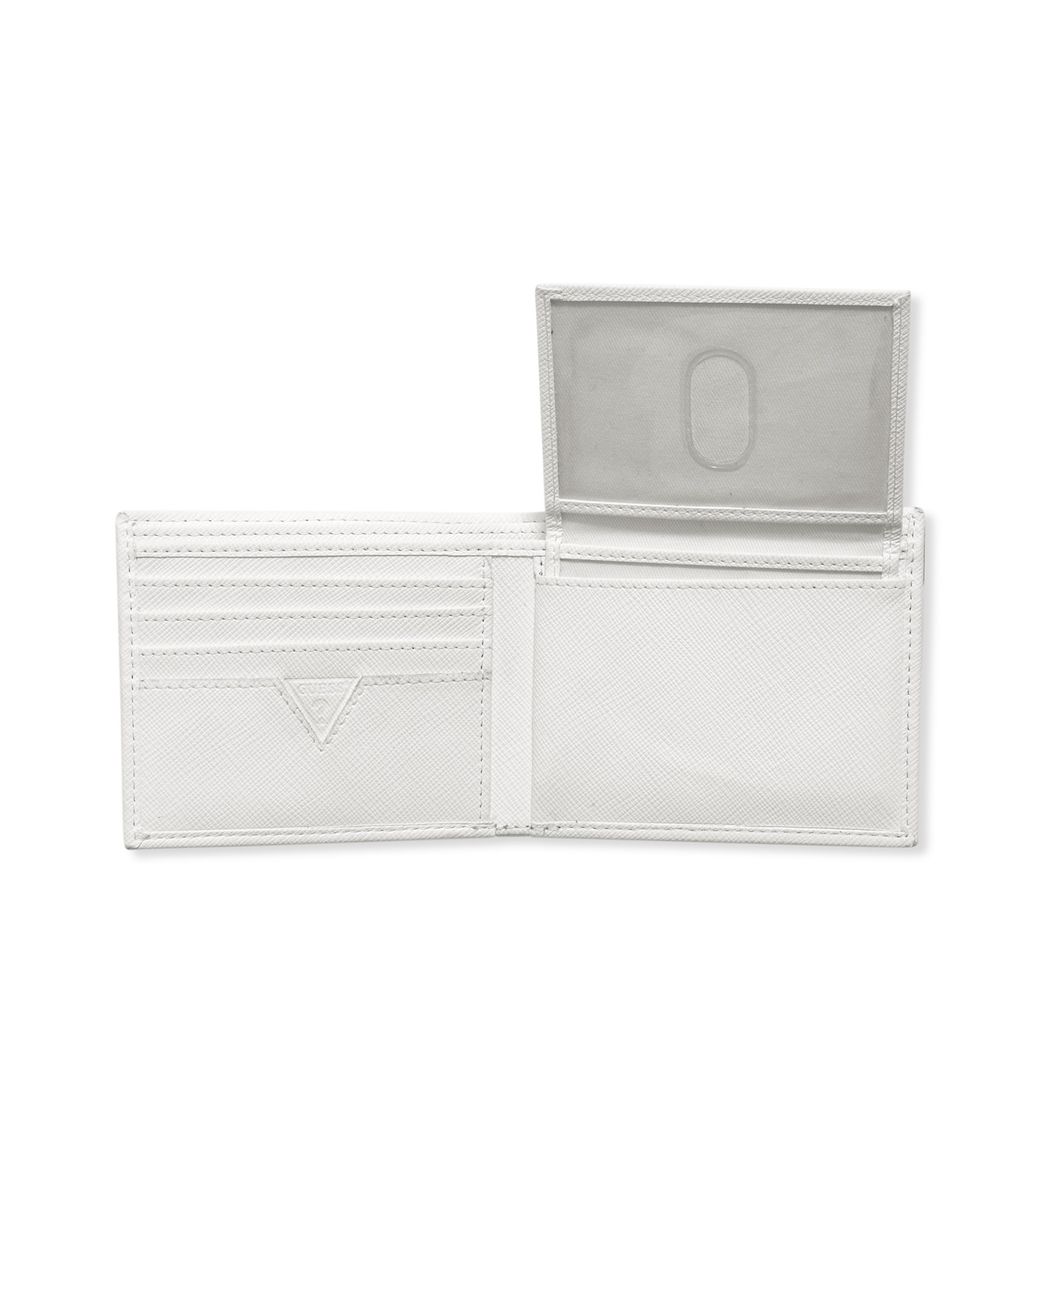 Guess Wallets Sarasota Passcase Wallet in White for Men | Lyst